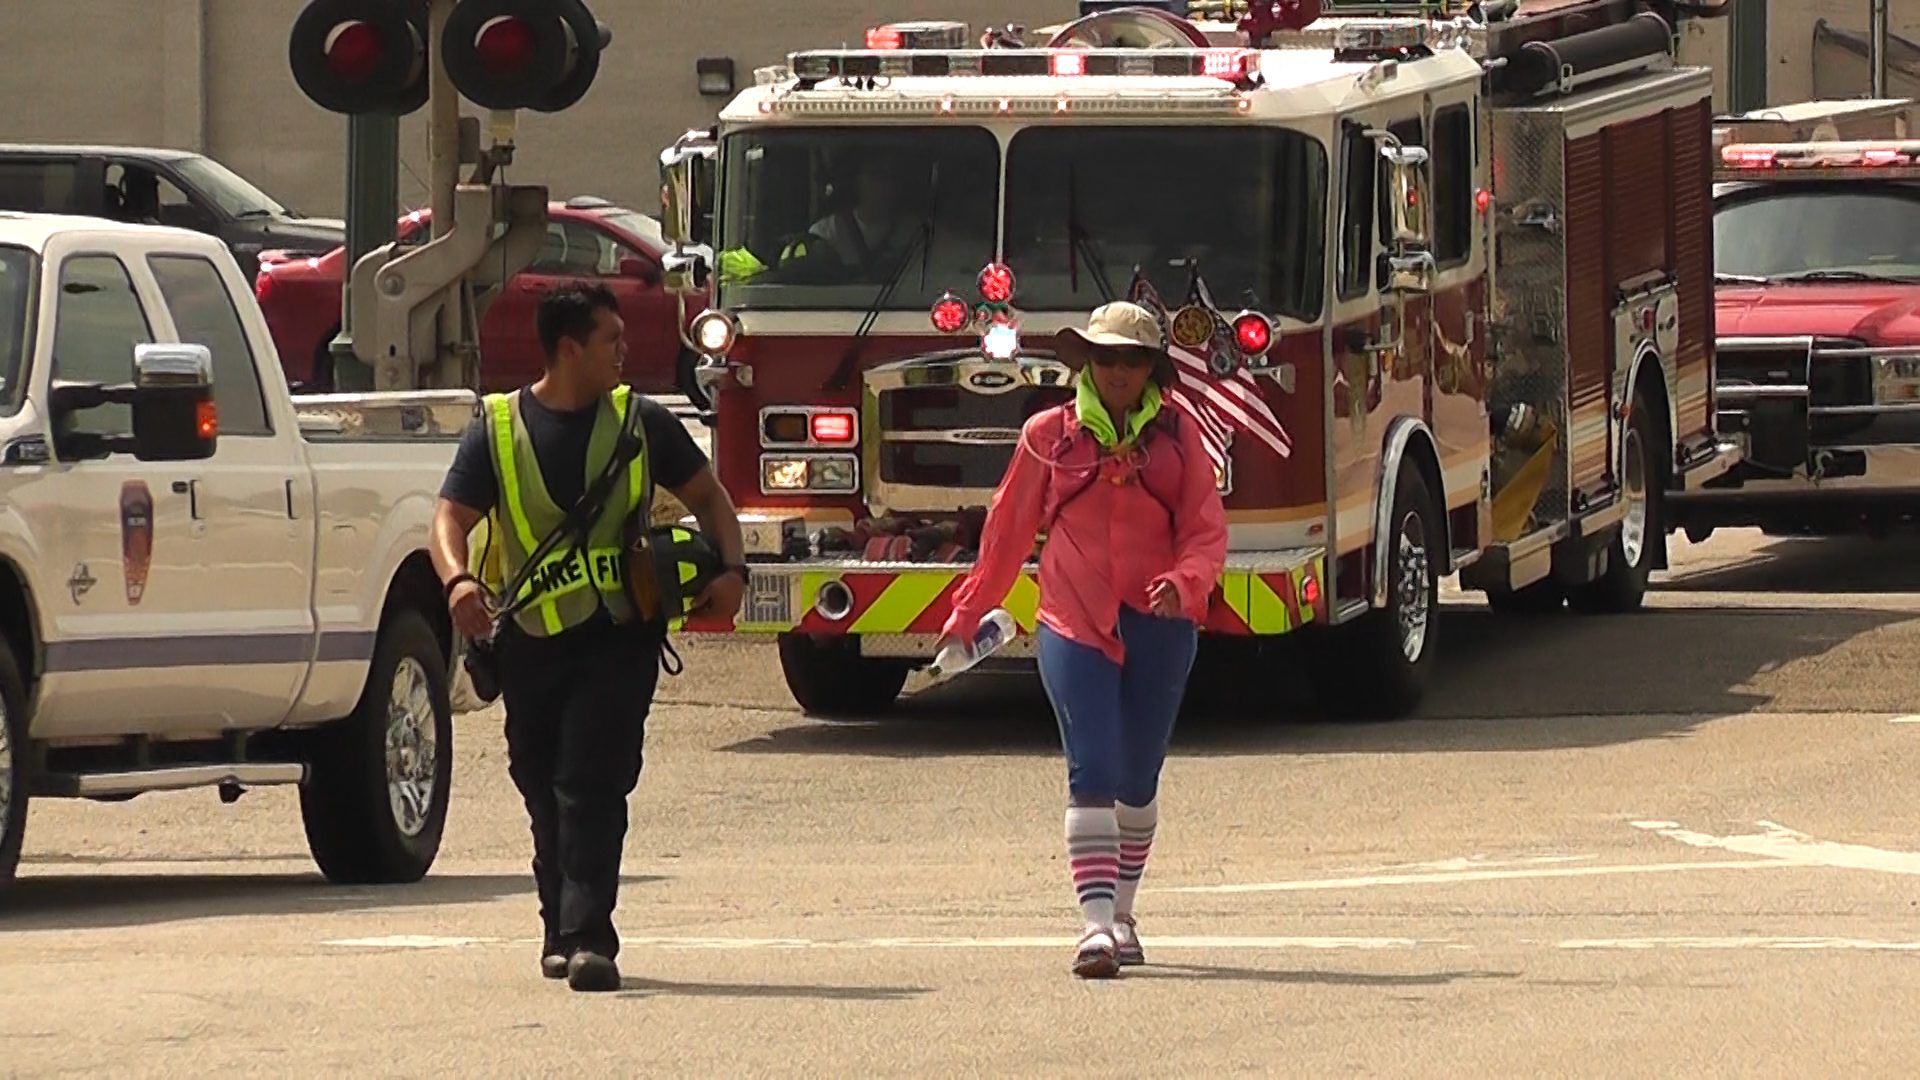 Pictured: Anna DeWitt walks through Goose Creek with various fire departments following her every step.